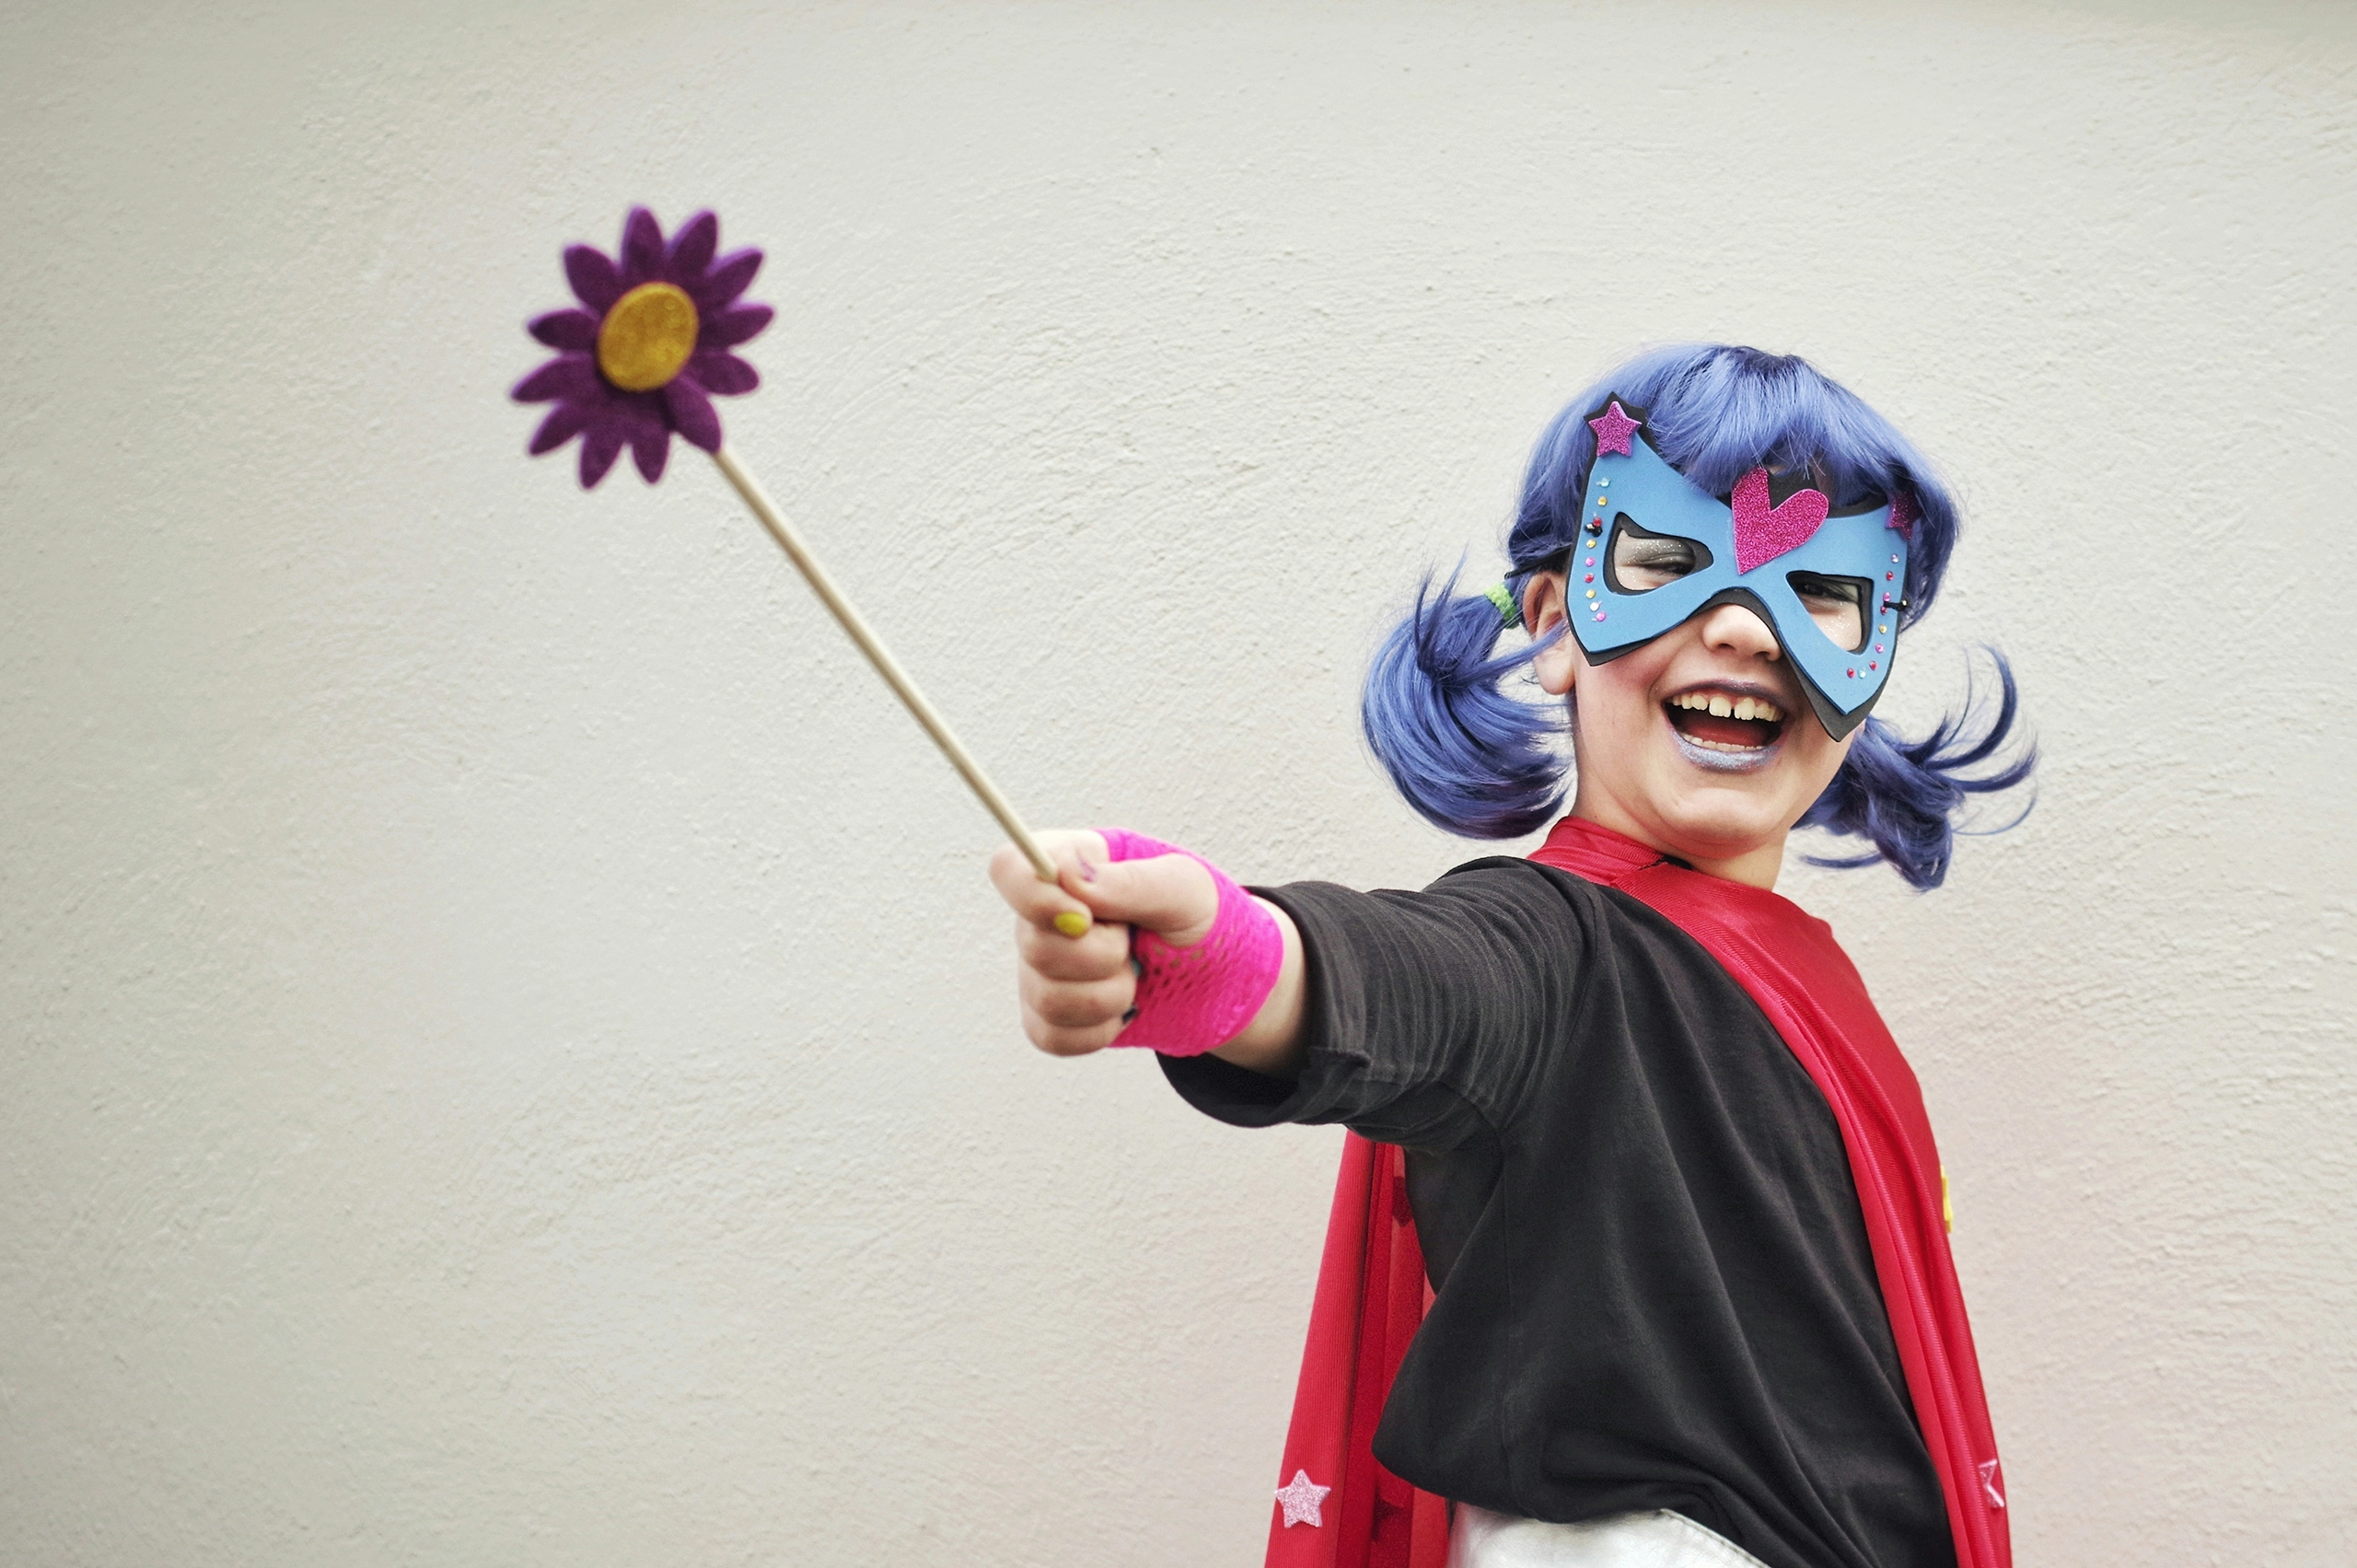 Young girl role-playing as a super hero